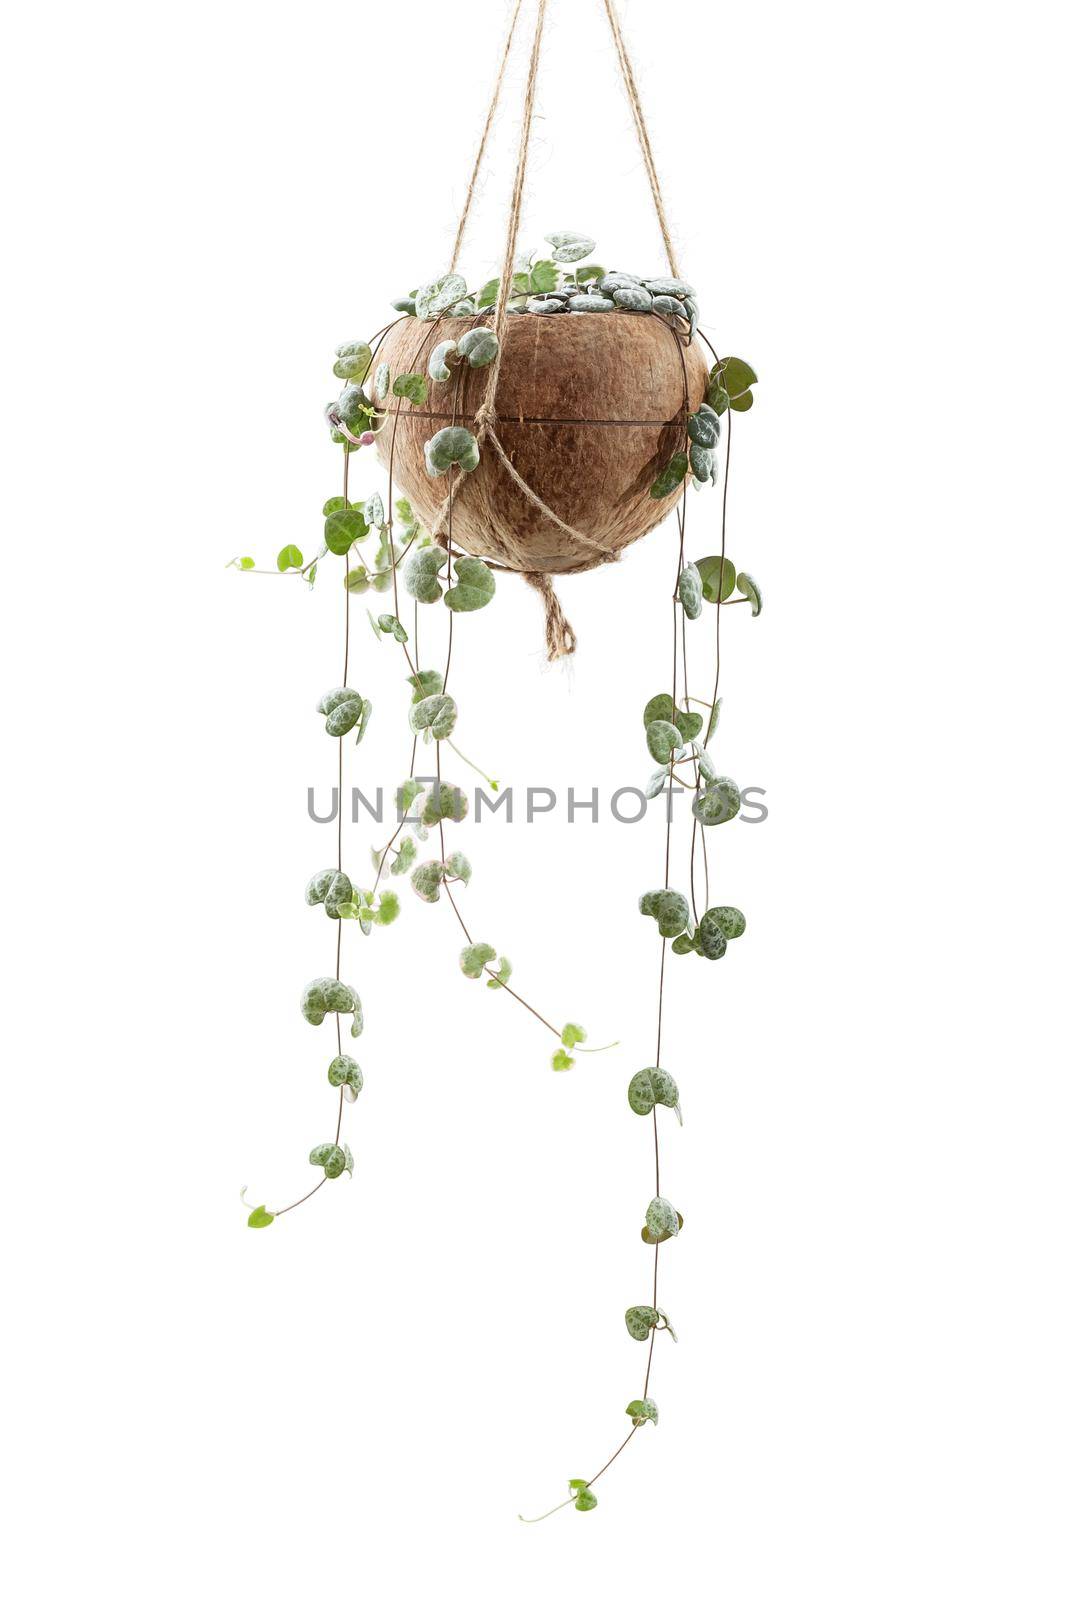 Ceropegia woodii plant or String of Hearts houseplant in DIY coconut shell pot isolated on white isolated background